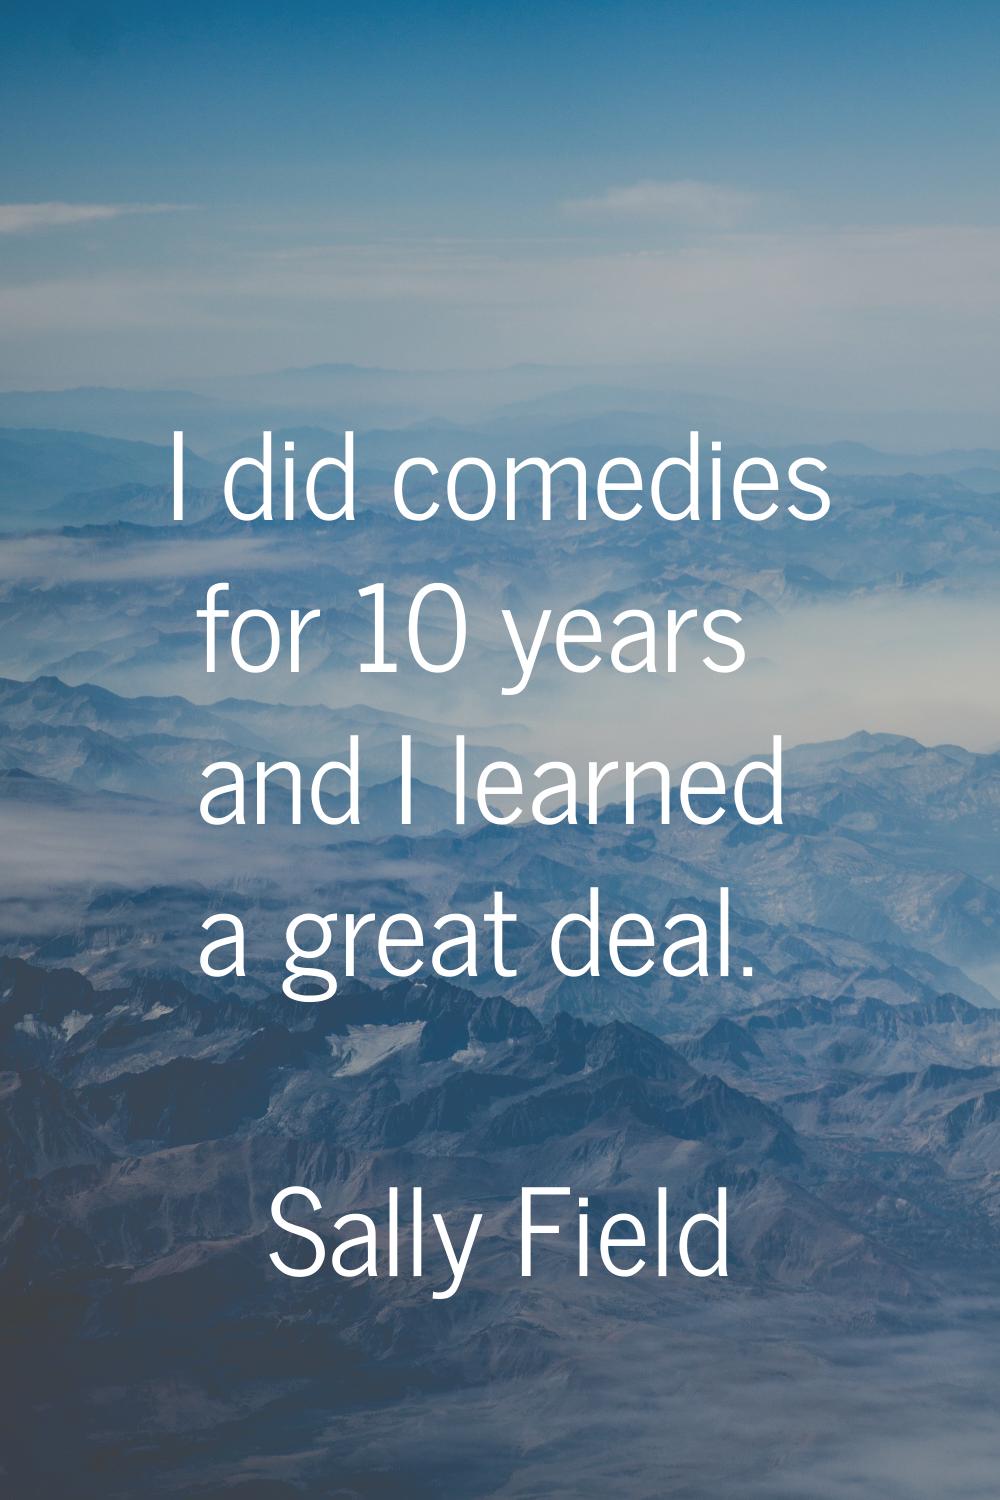 I did comedies for 10 years and I learned a great deal.